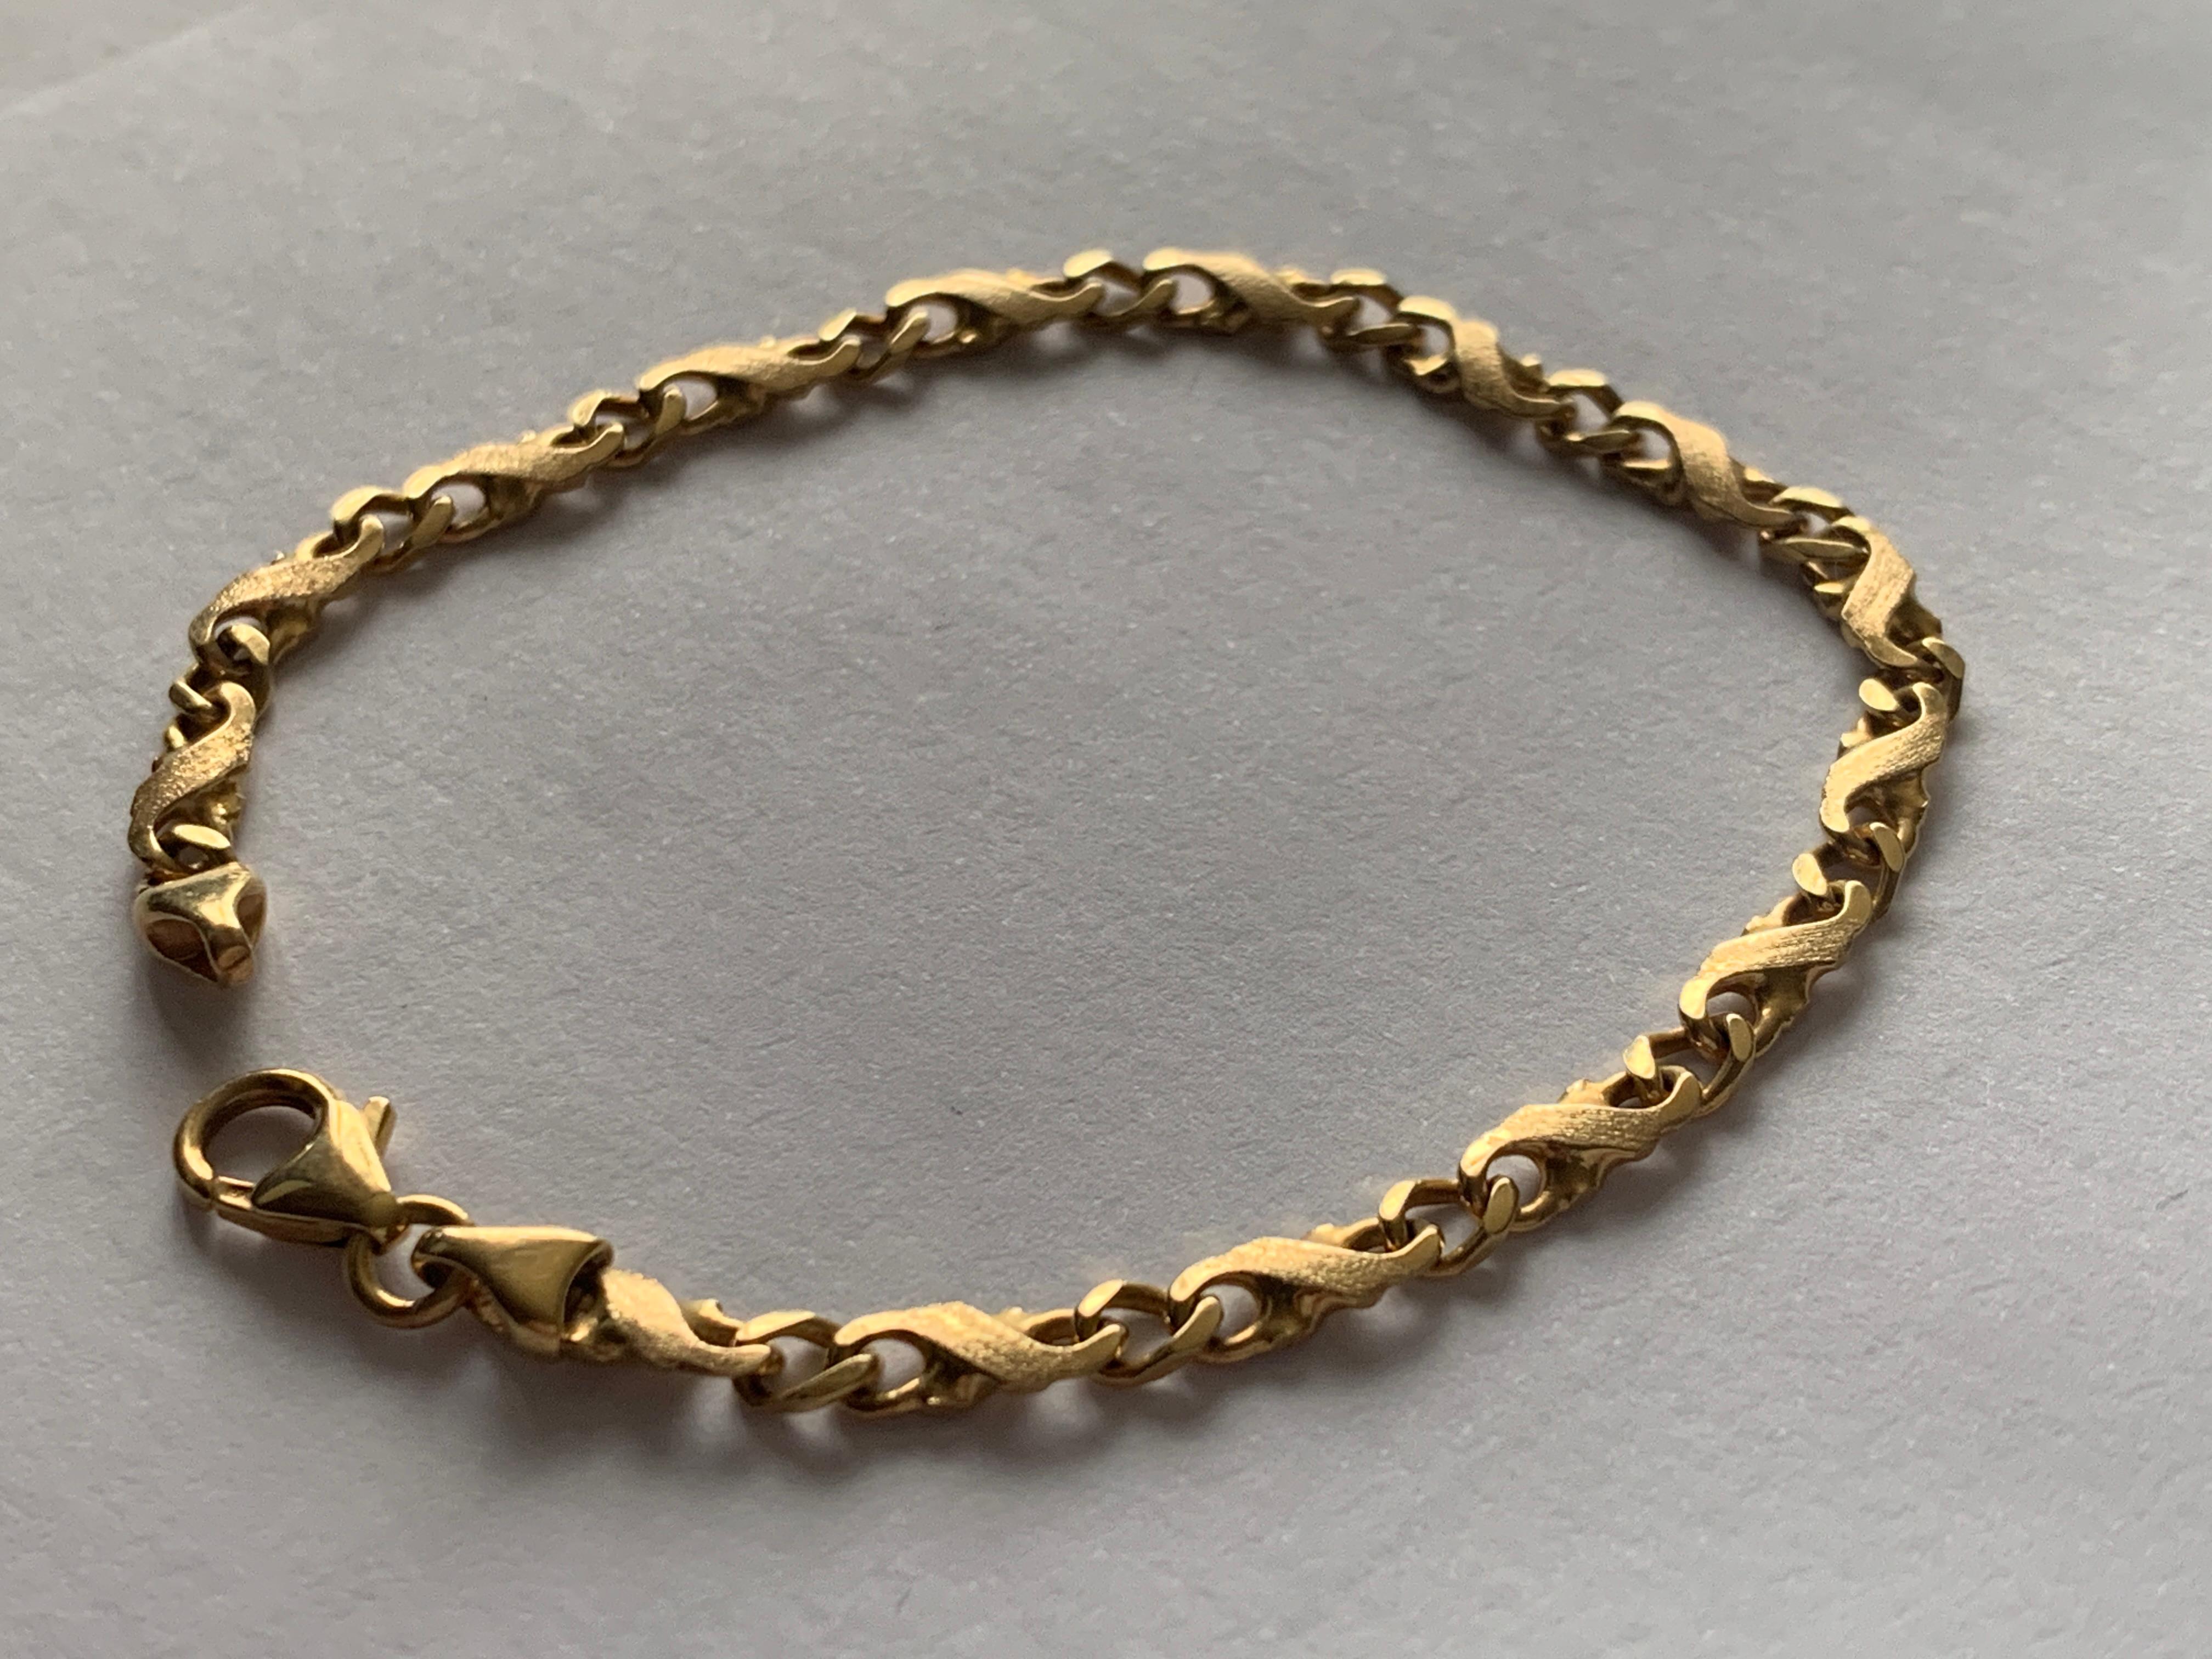 14ct 585 Gold Bracelet
with a beautiful link design that has a brushed 
naturalised design surface 
the links are solid gold - not hollow
the Gold colour is exquisite 
Polish stamp marks for 14ct Gold